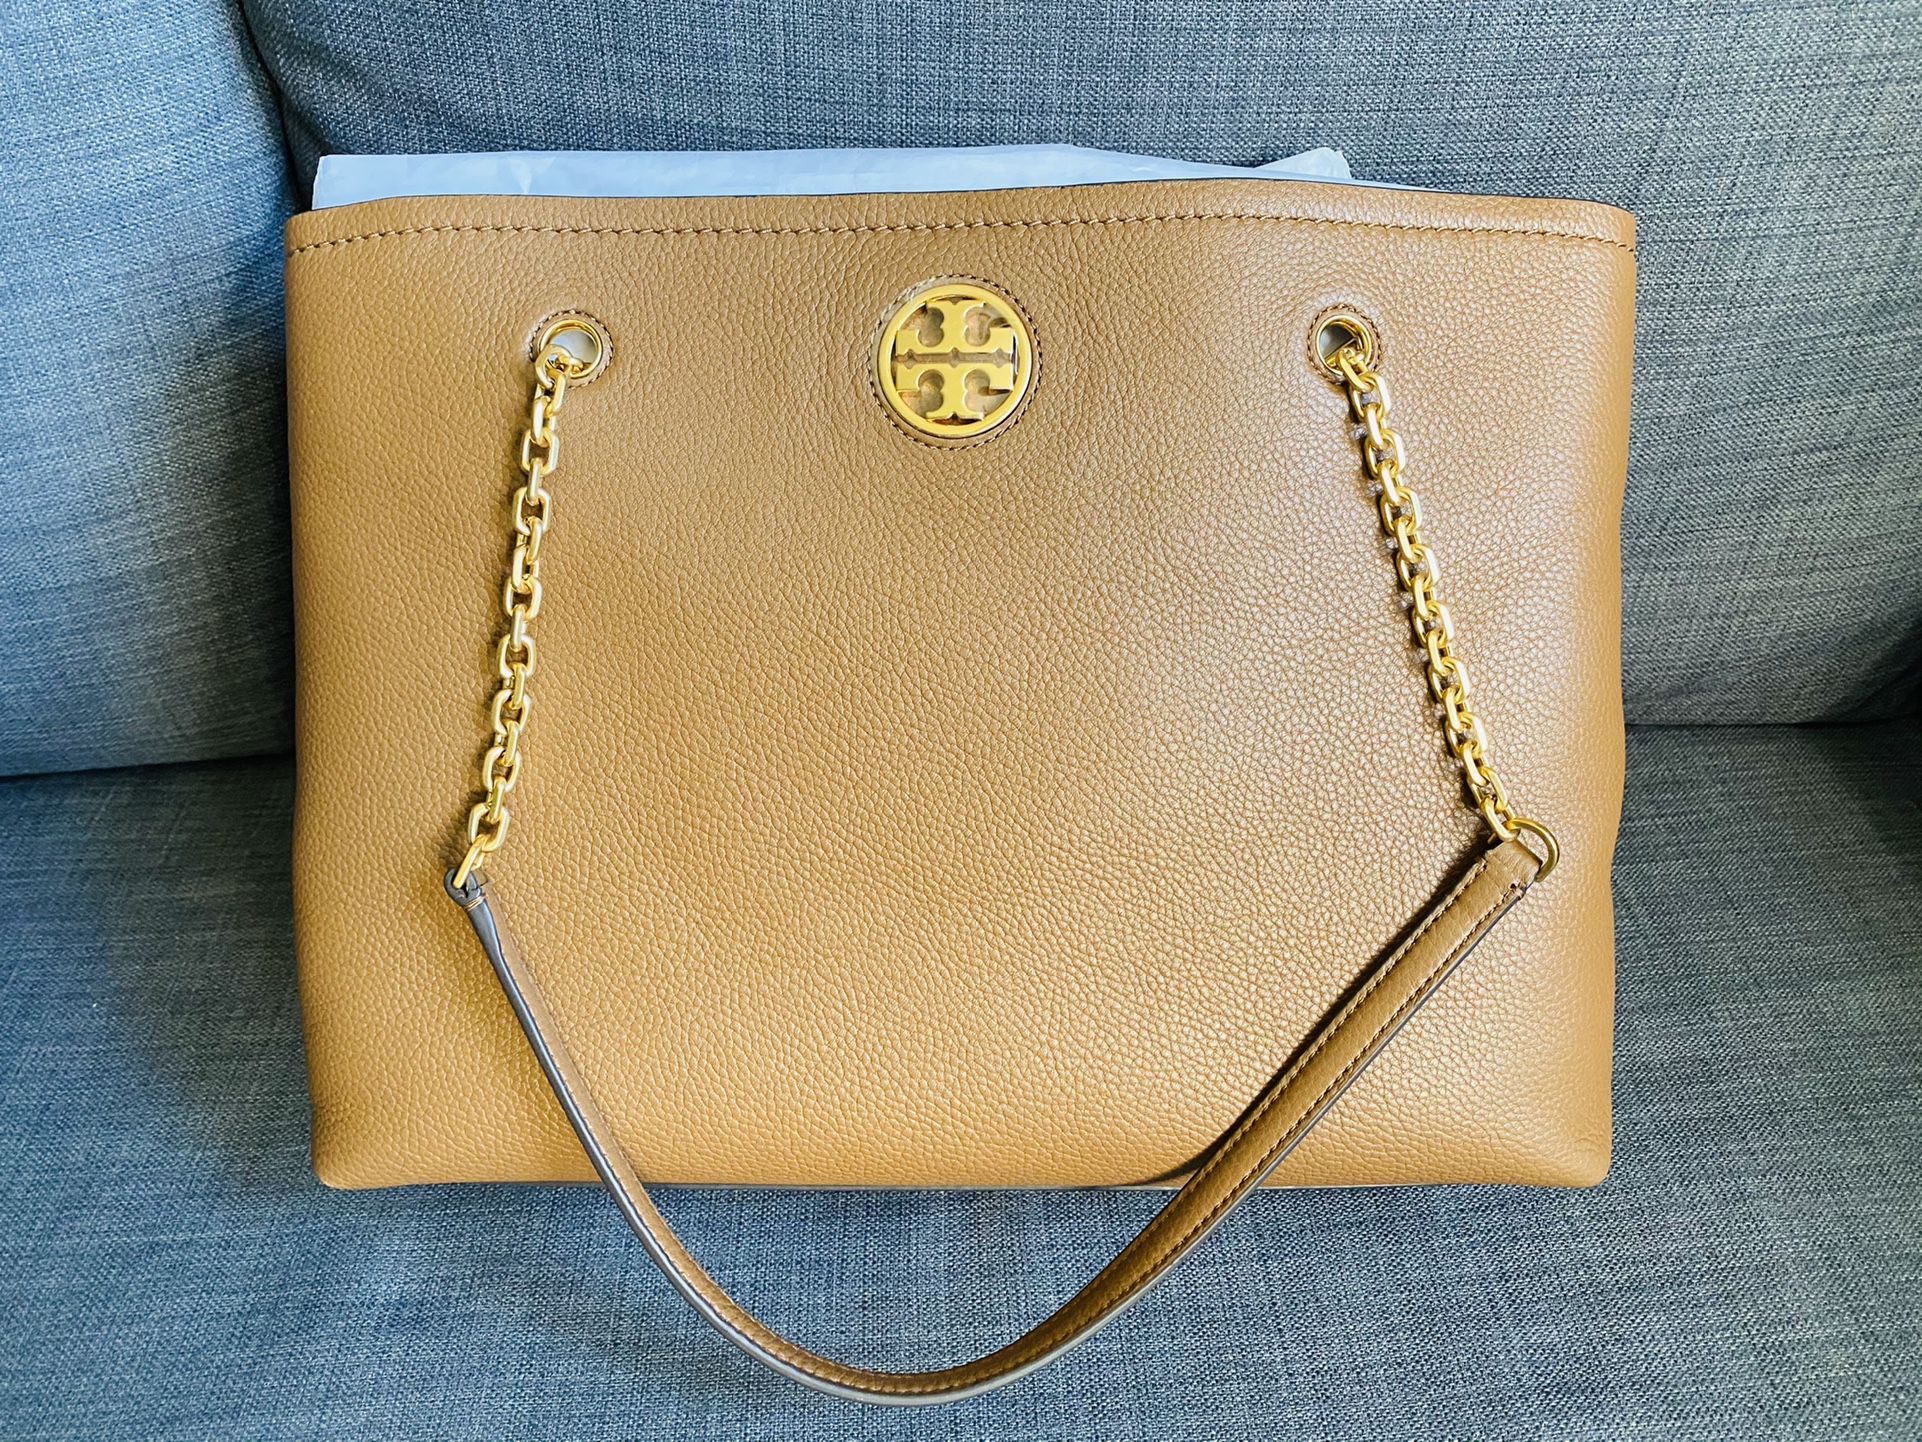 Tory Burch Leather Bag Tote $299 OBO